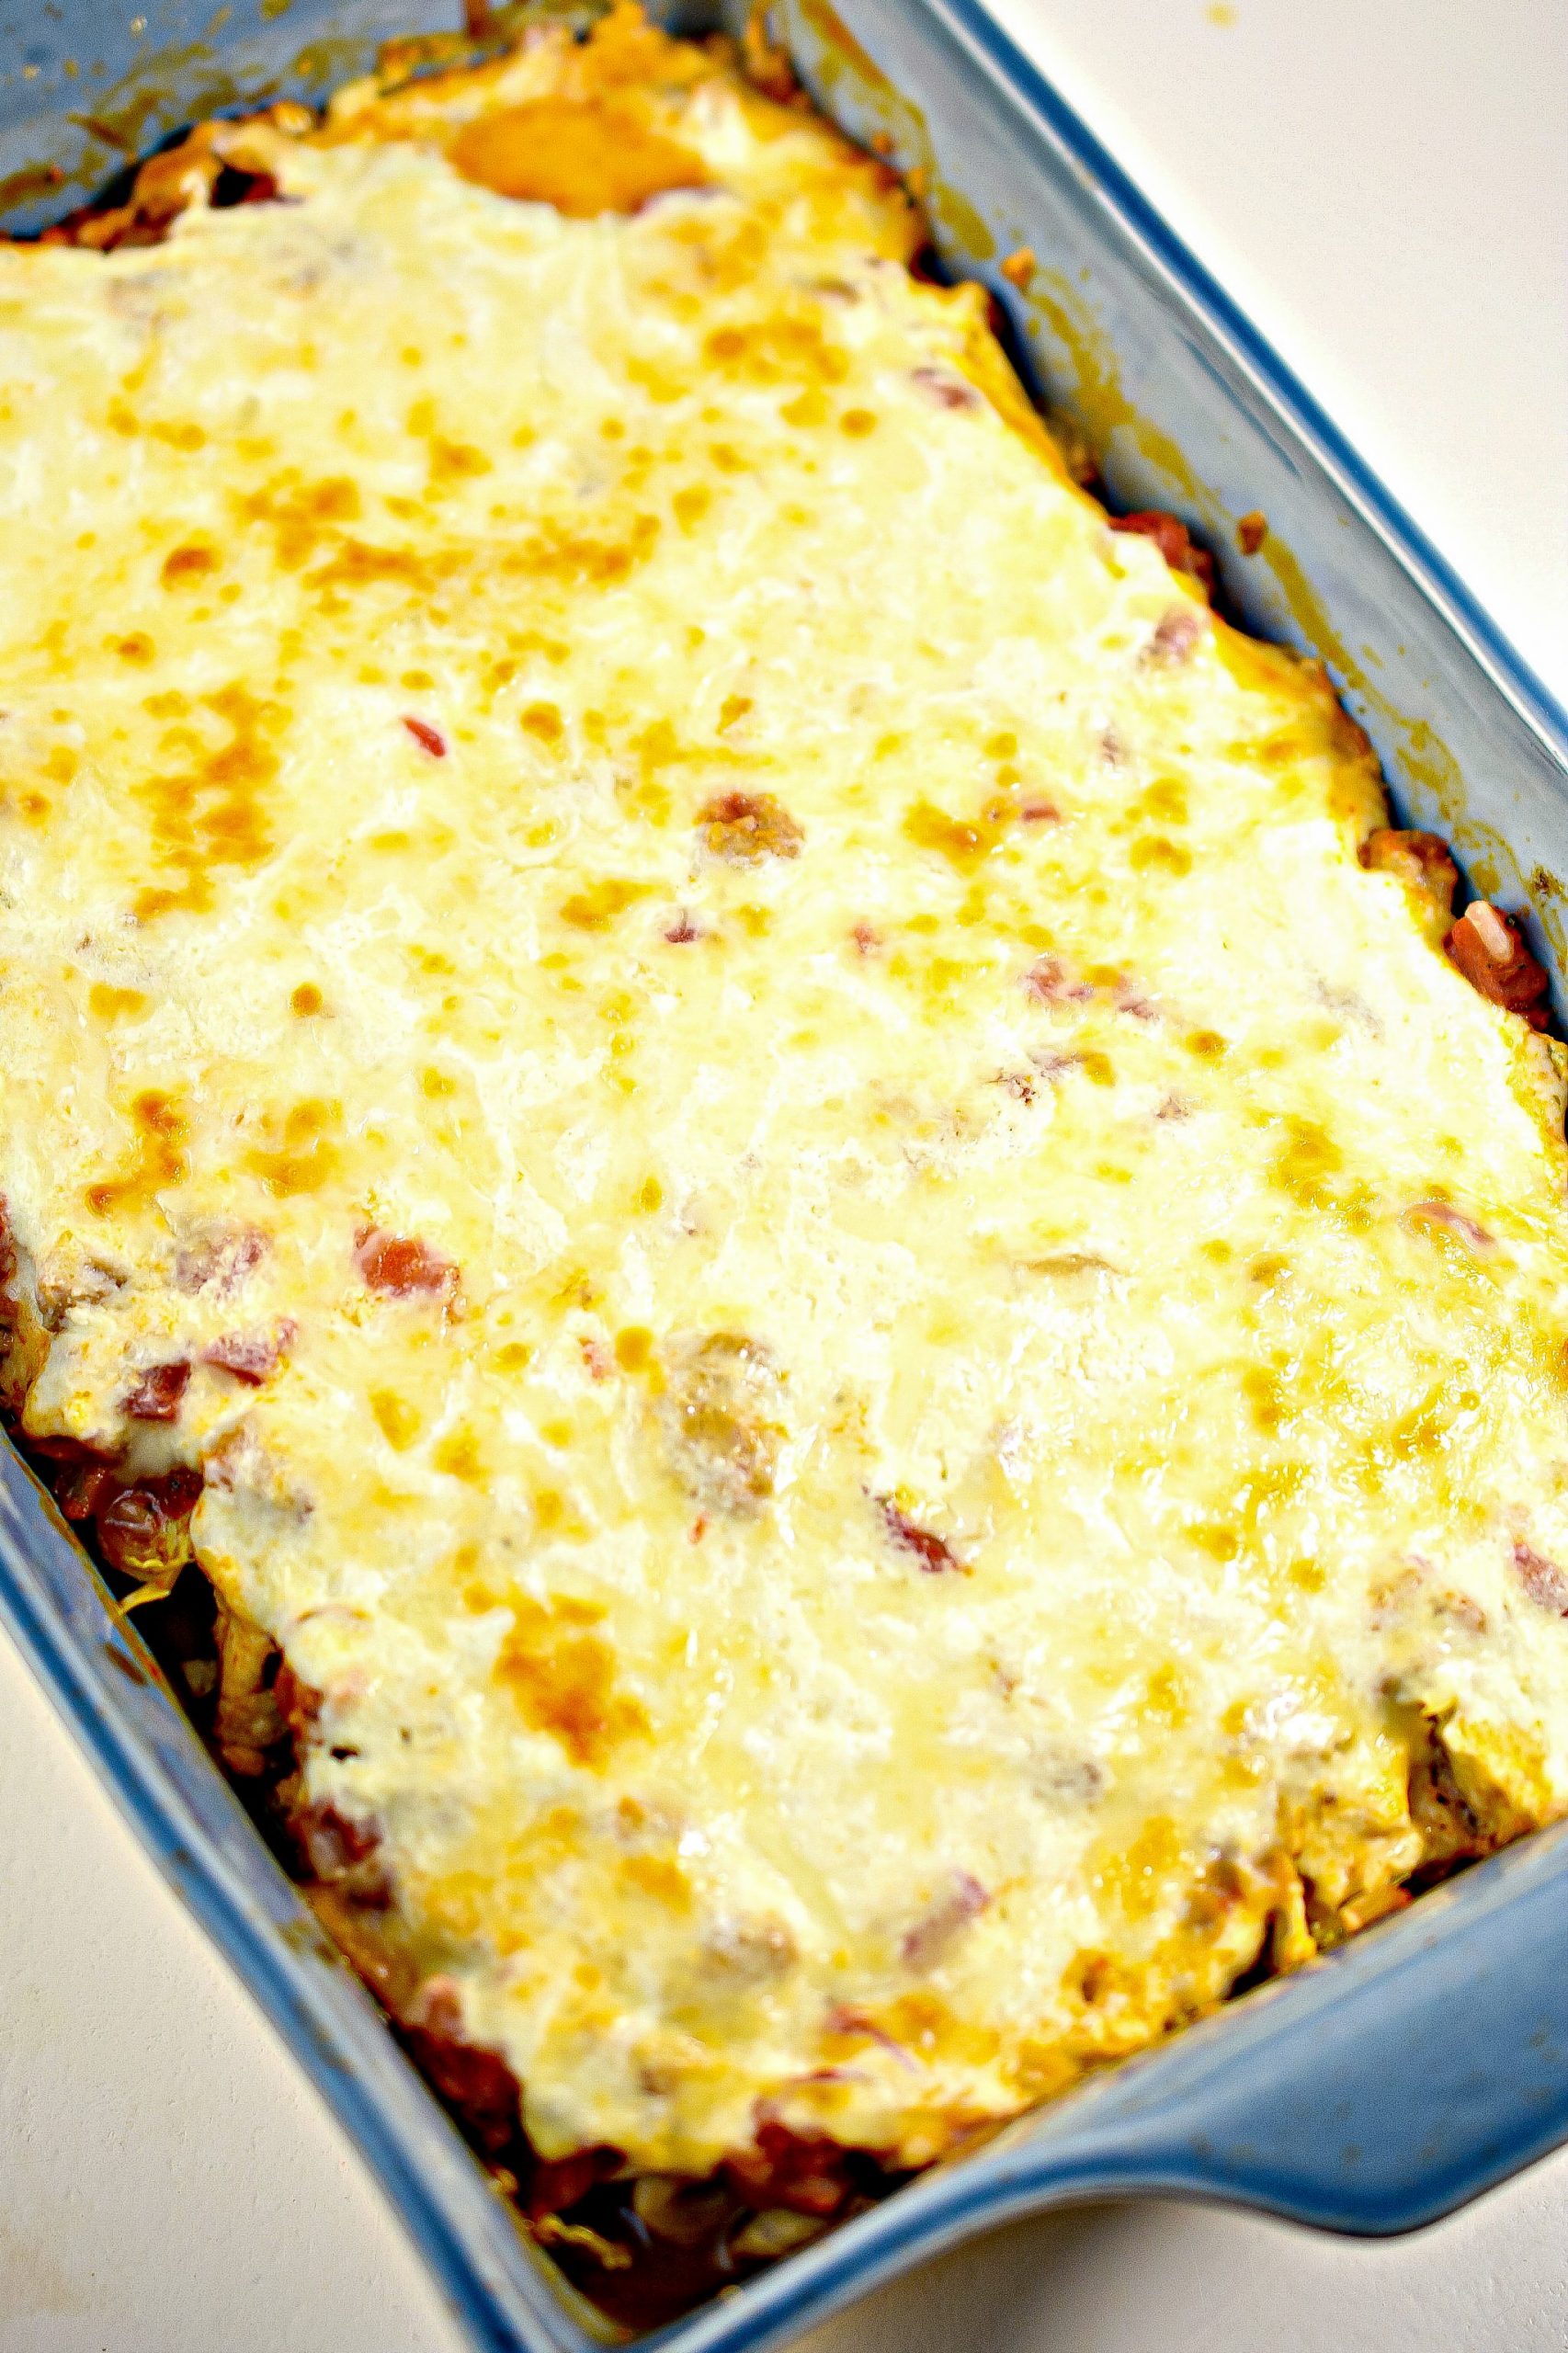 Cover the casserole dish with tin foil, and bake for 40 minutes